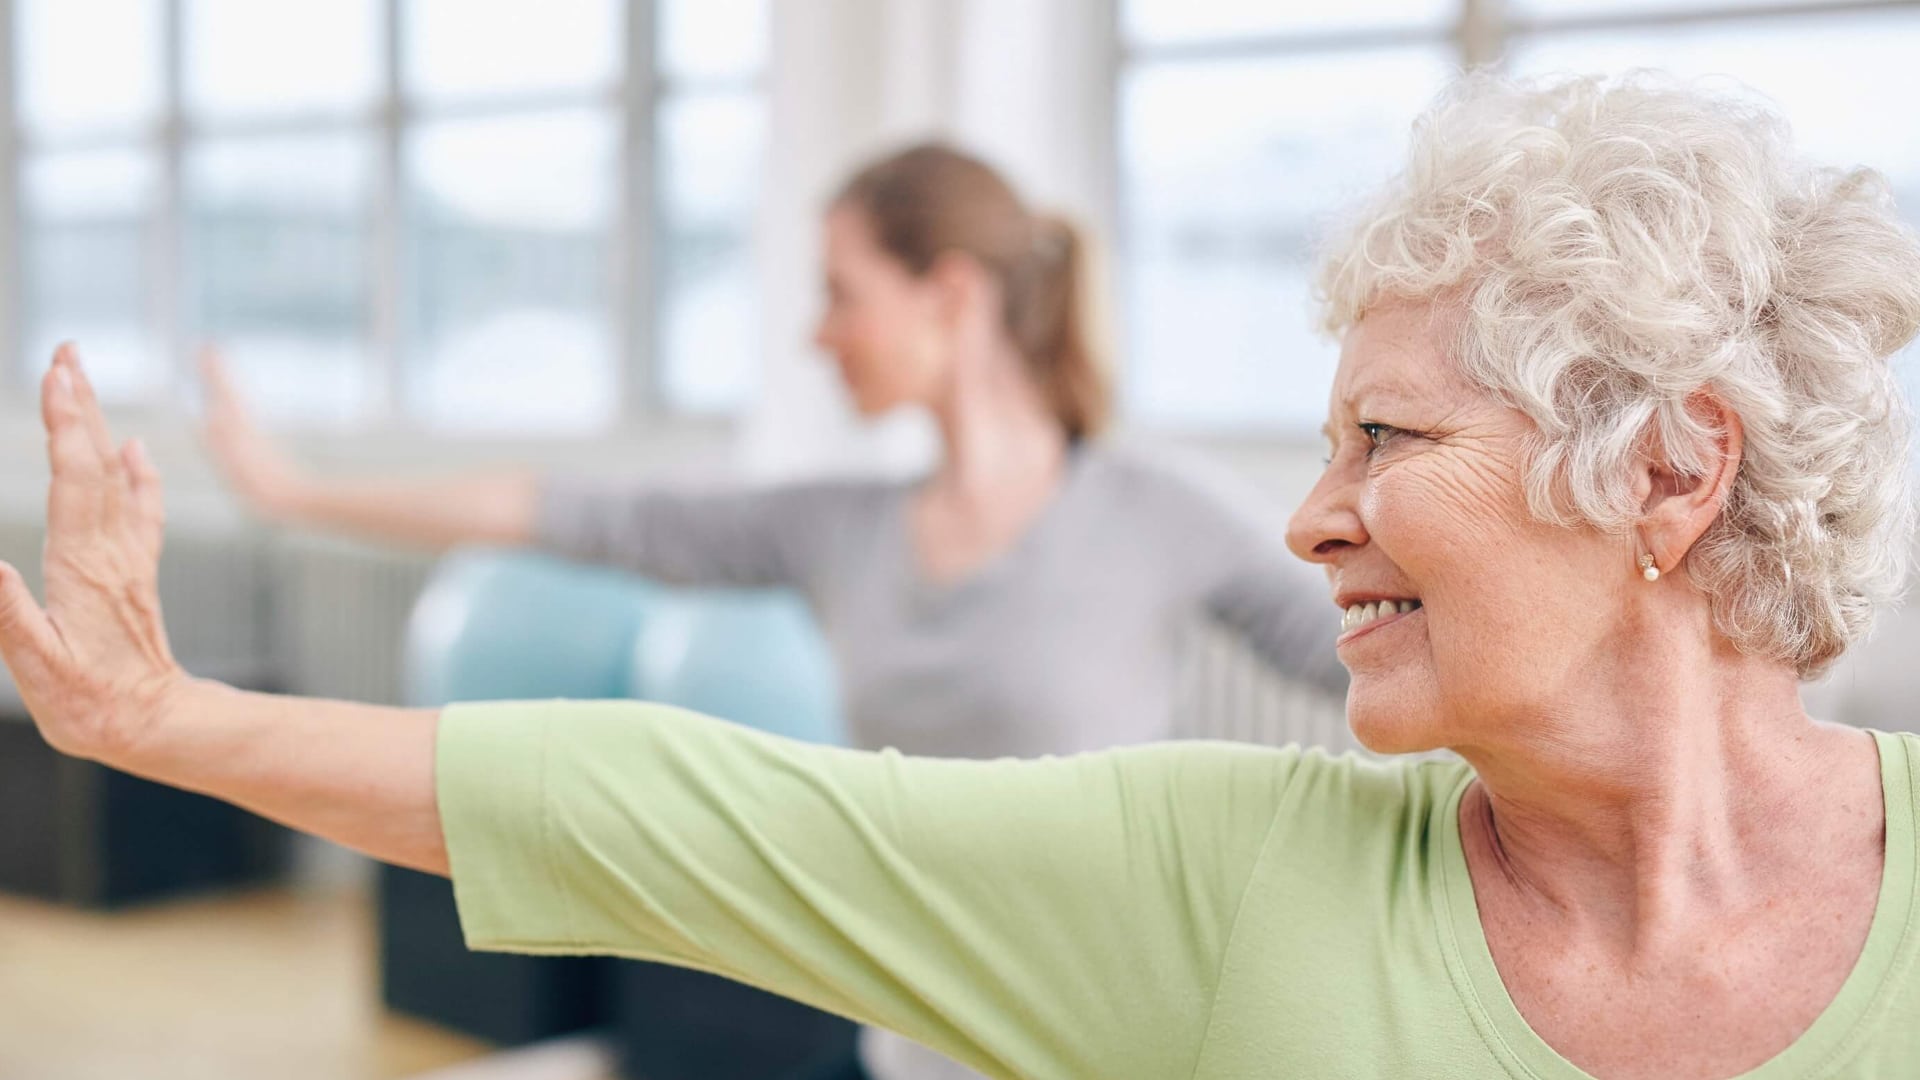 Yoga for Seniors: Mindful Chair Yoga Poses and Coherent Breathing